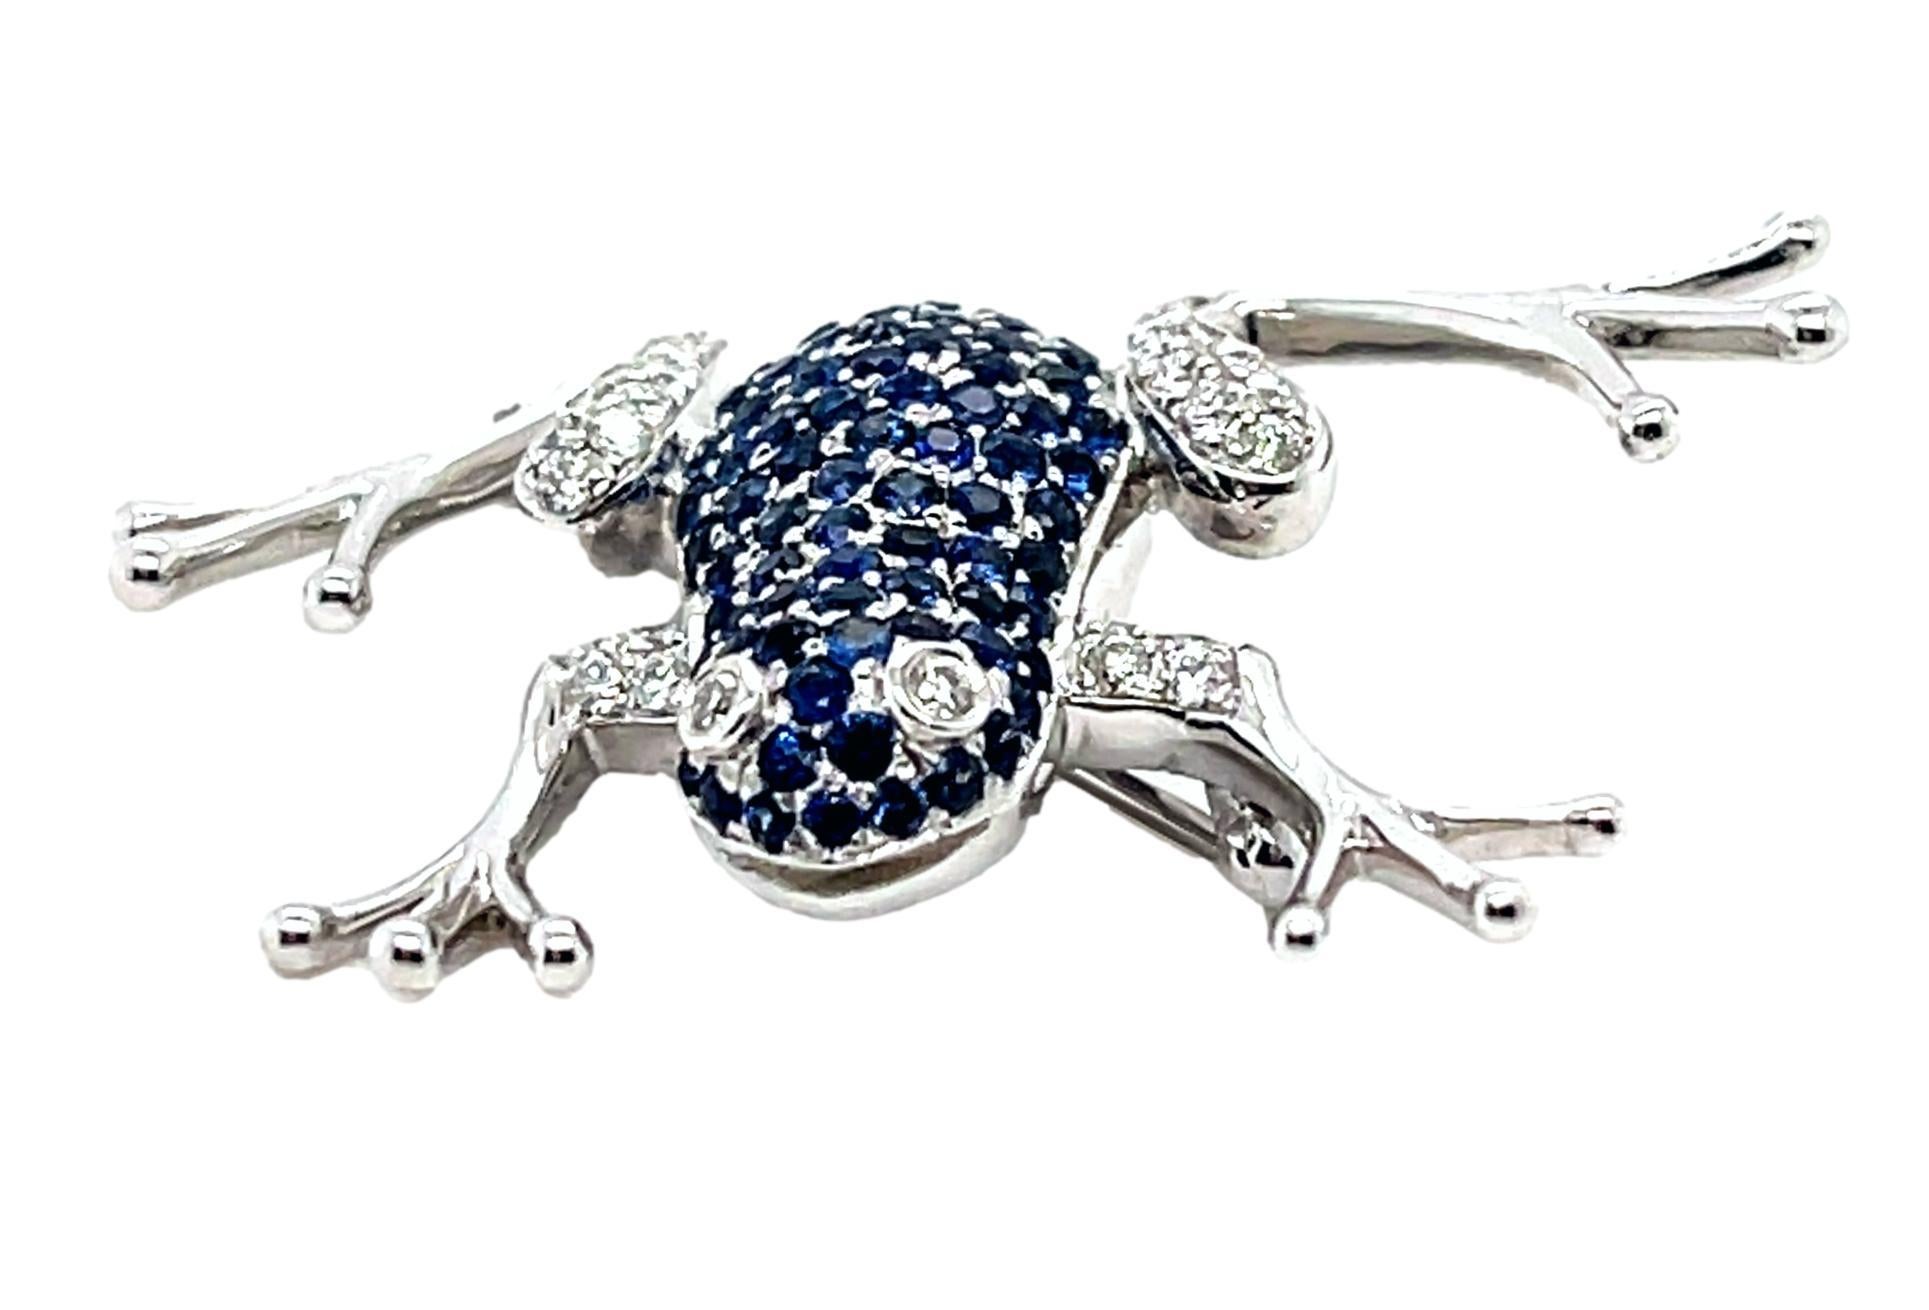 This stunning Frog Brooch is the perfect accent to wear at that cocktail event. It has one carat of top quality Sapphires along with sparkling diamonds all set in 18K white gold. It has a pull lock for extra security. This brooch comes in a